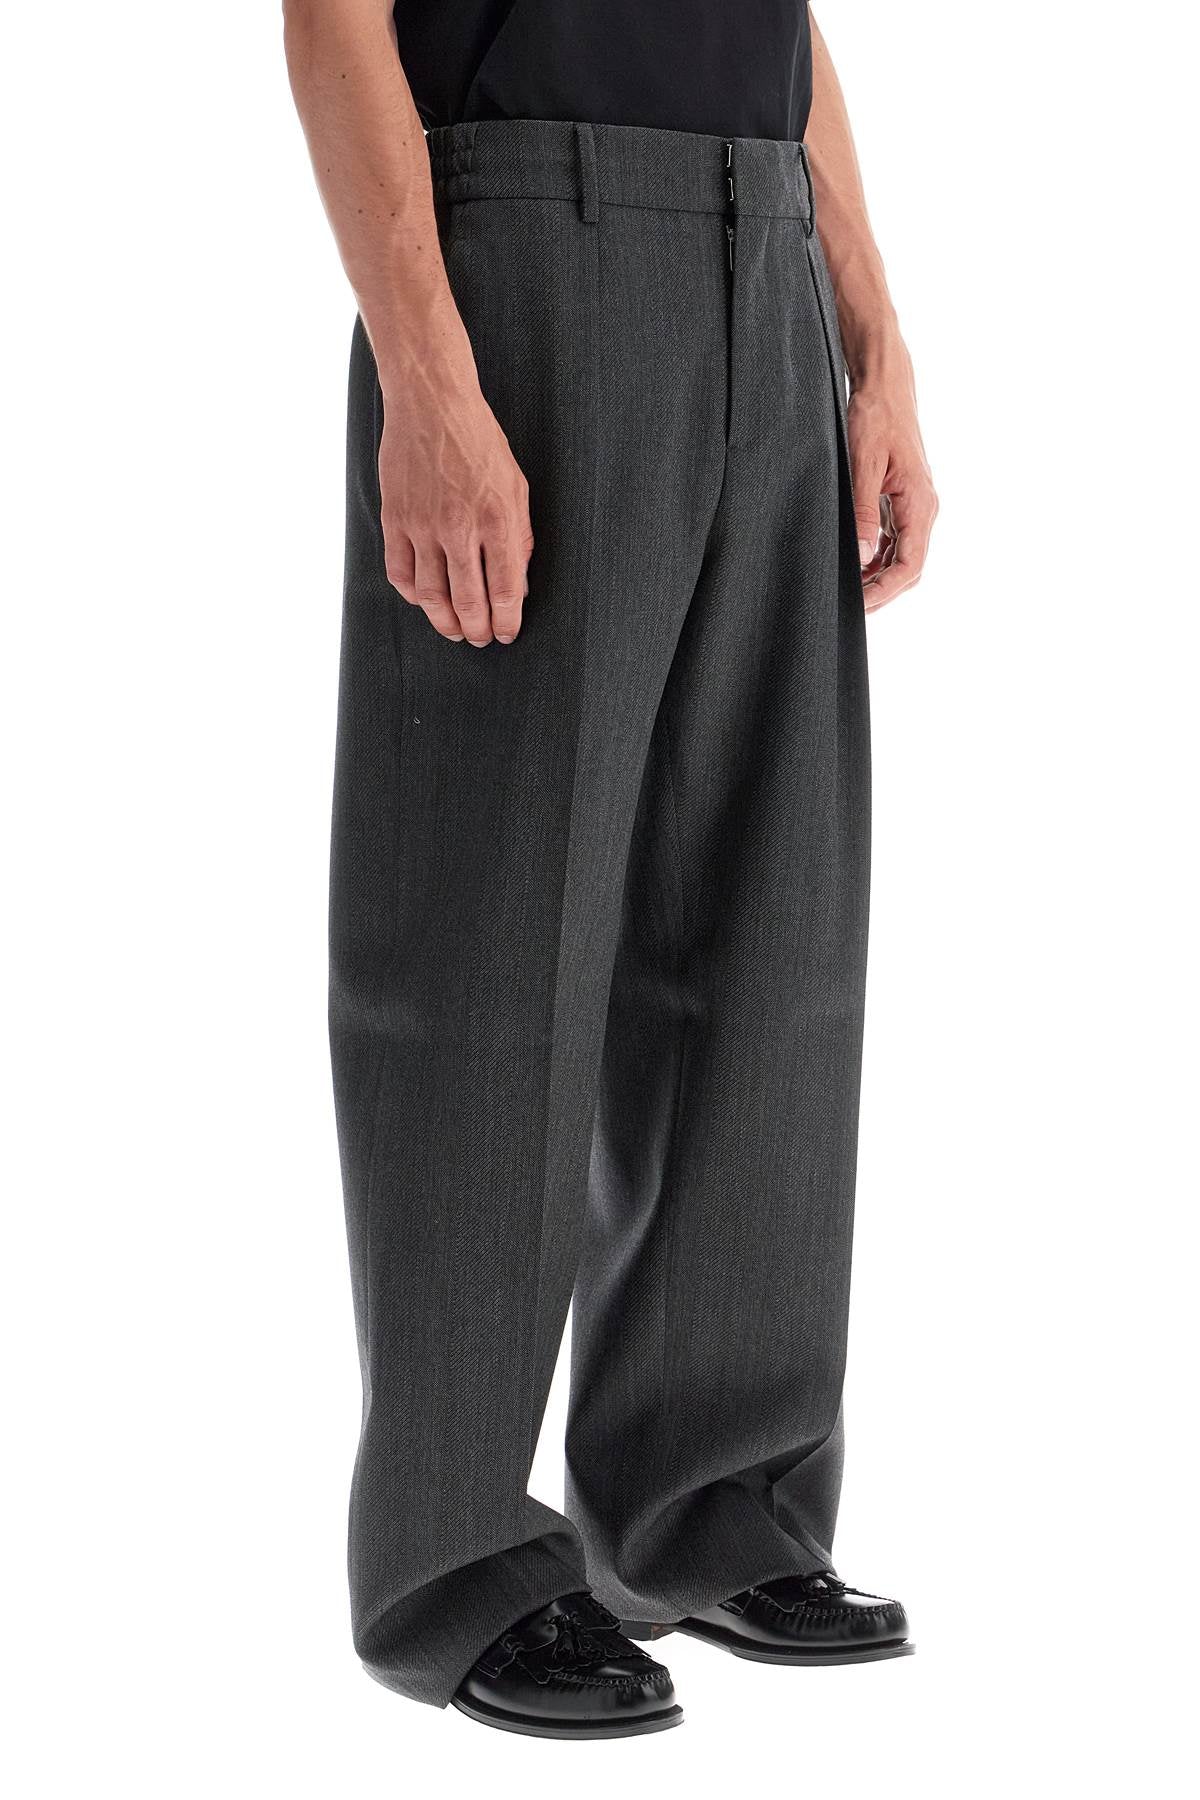 BURBERRY WIDE WOOLEN Checkered Design TROUSERS